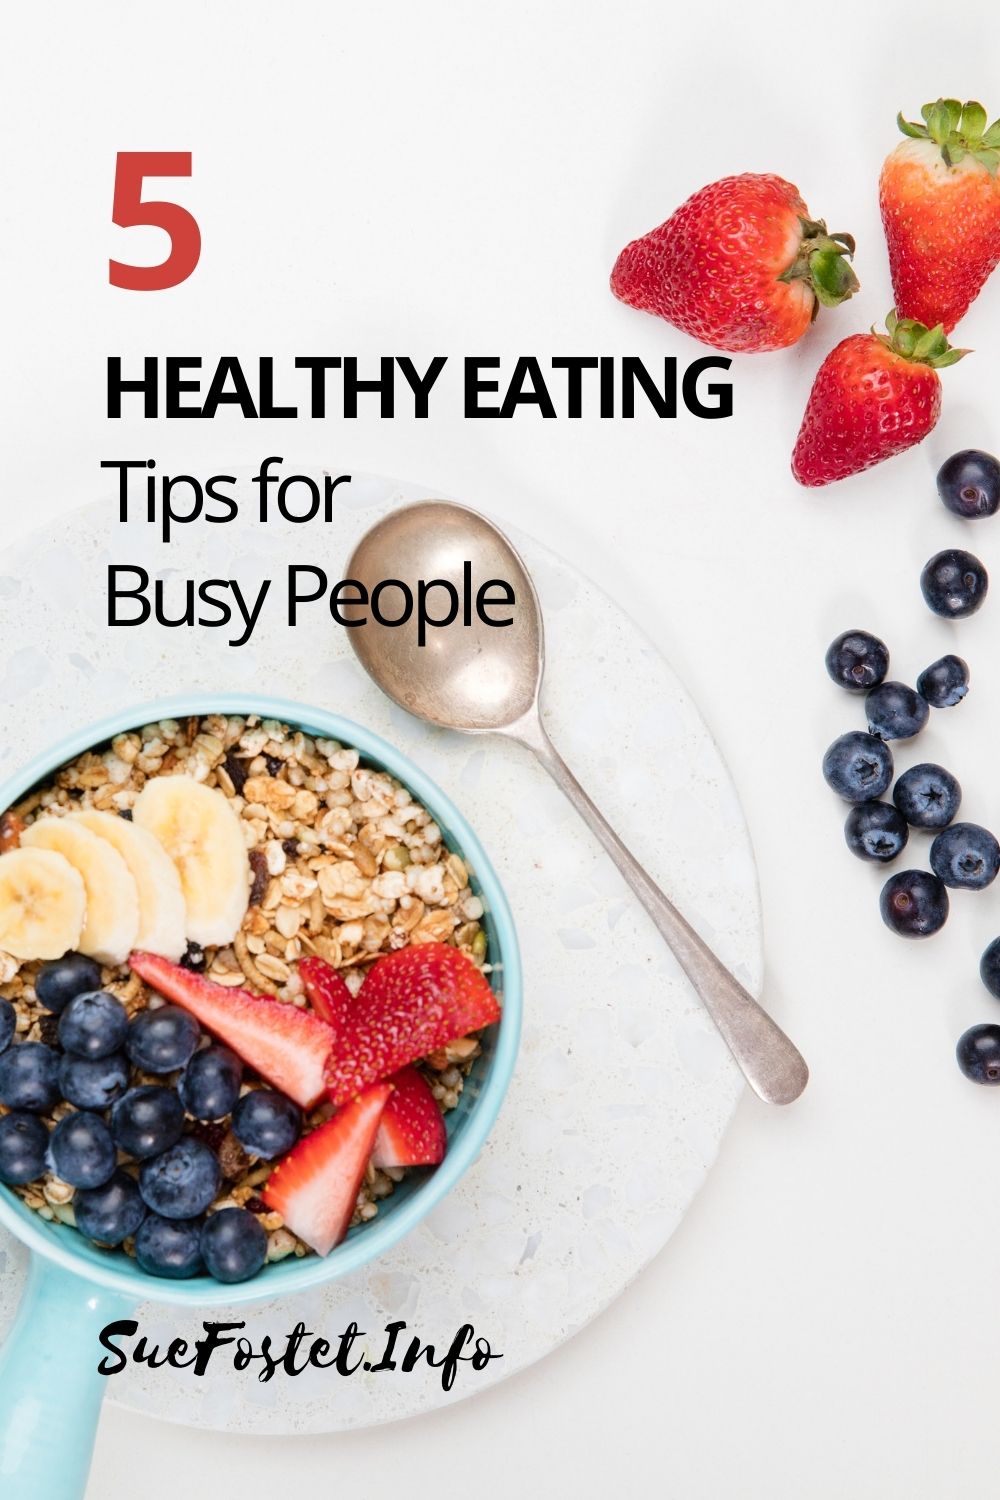 How to Eat Healthier Despite Your Busy Schedule